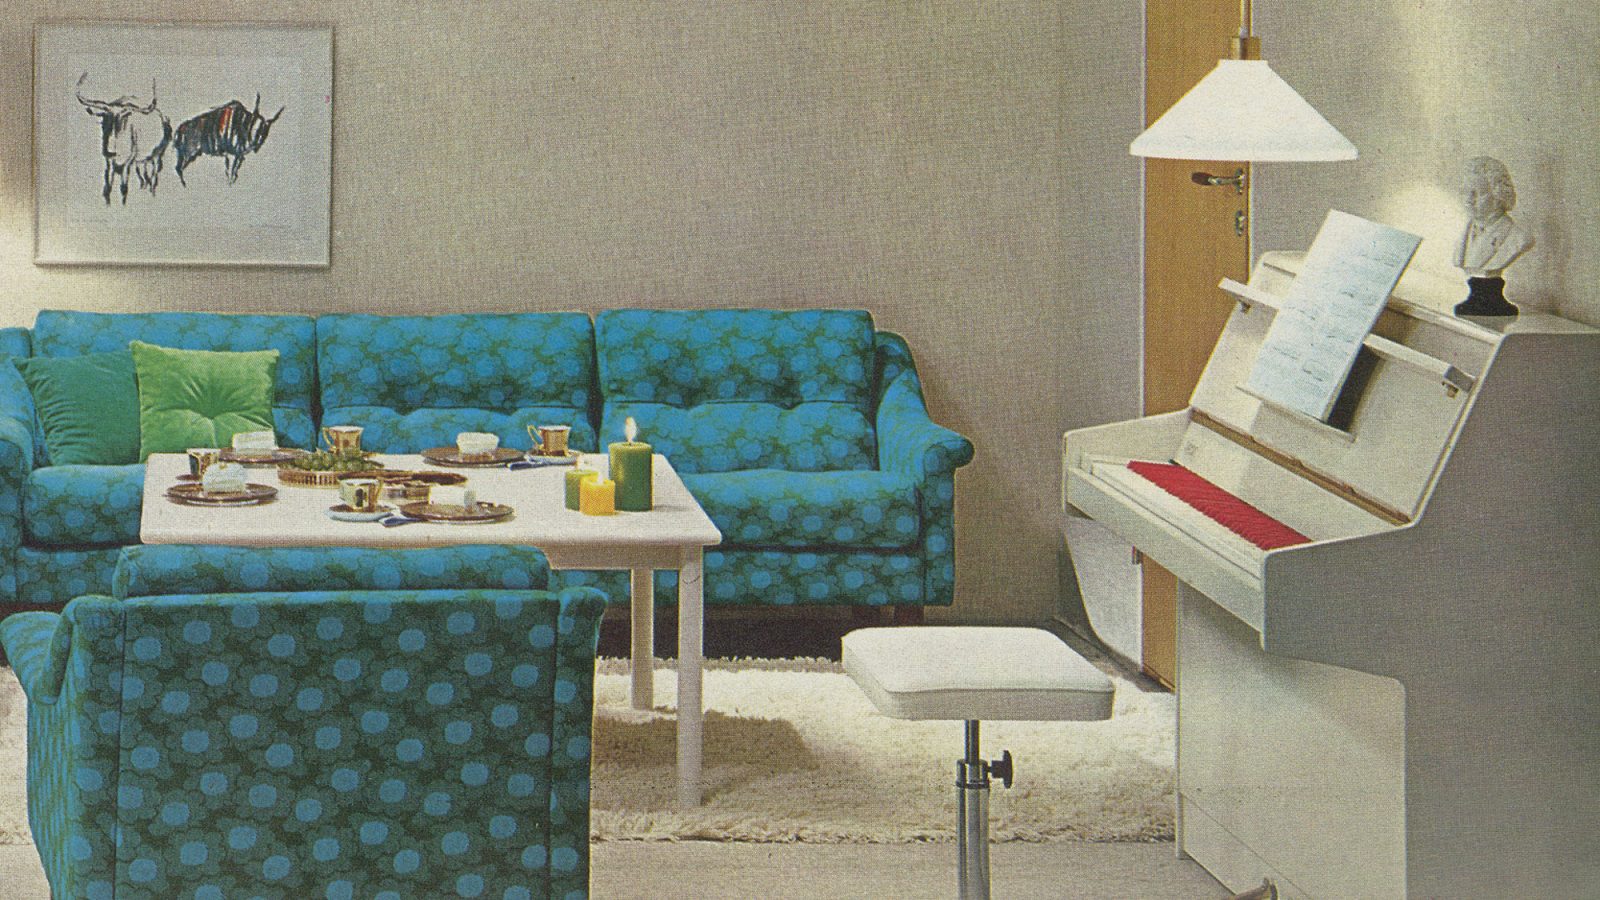 1970s interior with green-turquoise sofa, white rya rug, and white piano with red and white keys.